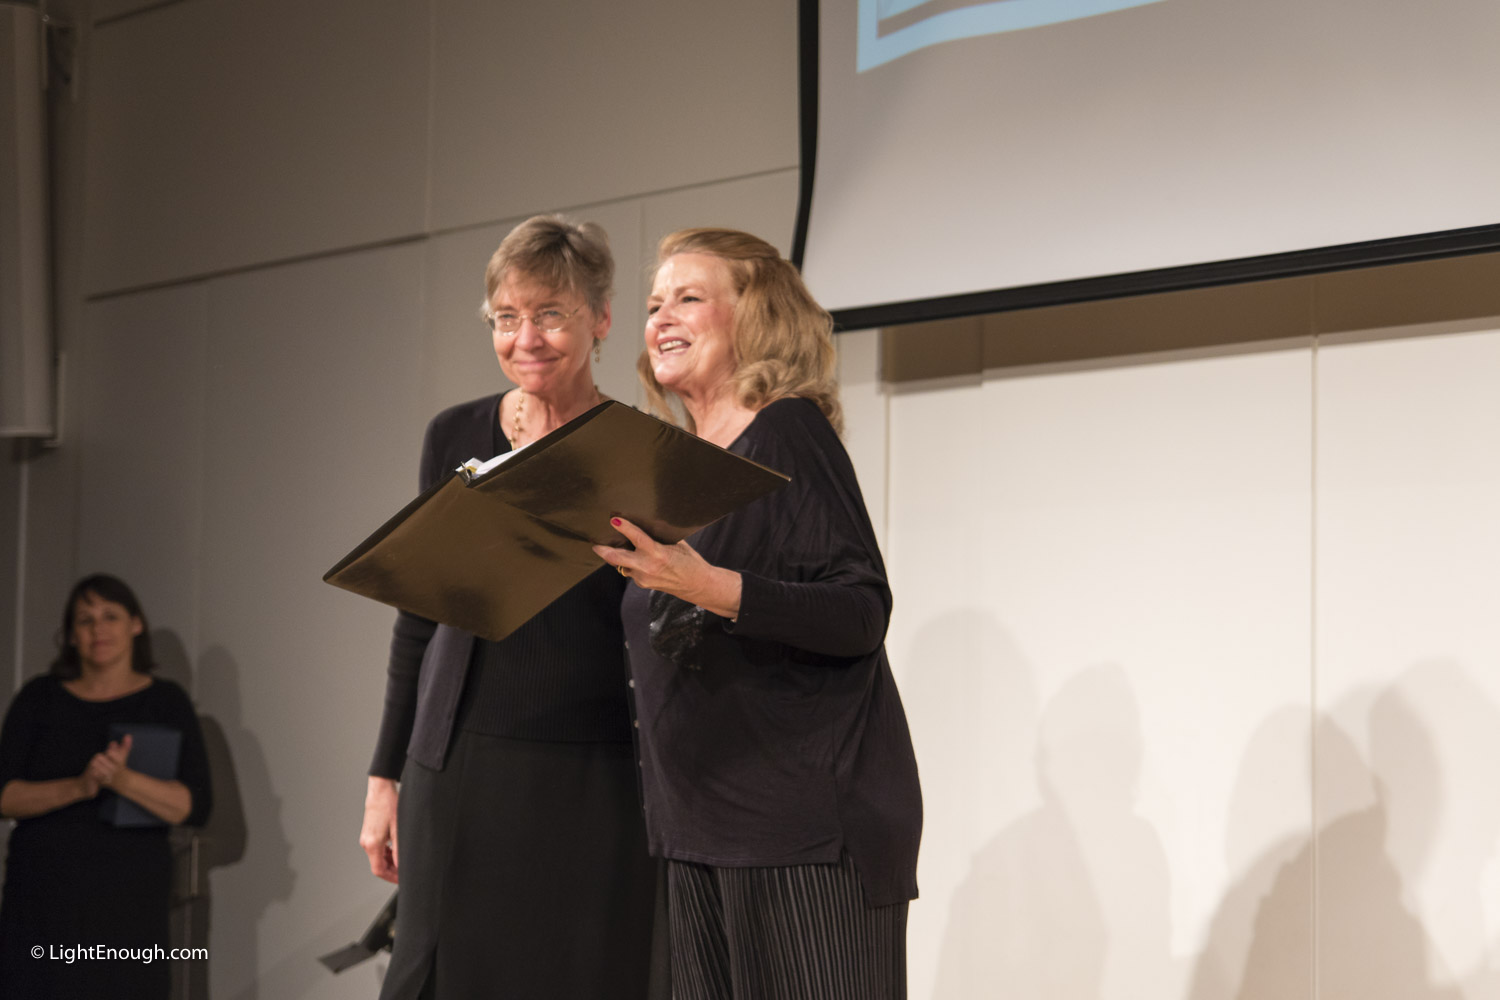  Diane Dorius, Chair Cabaret Planning Committee presents Award to long-serving Music Director Barbara Schelstrate at the UUCA Chalice Theatre Cabaret 20 year review (2016) Photo by John St Hilaire at www.lightenough.com 